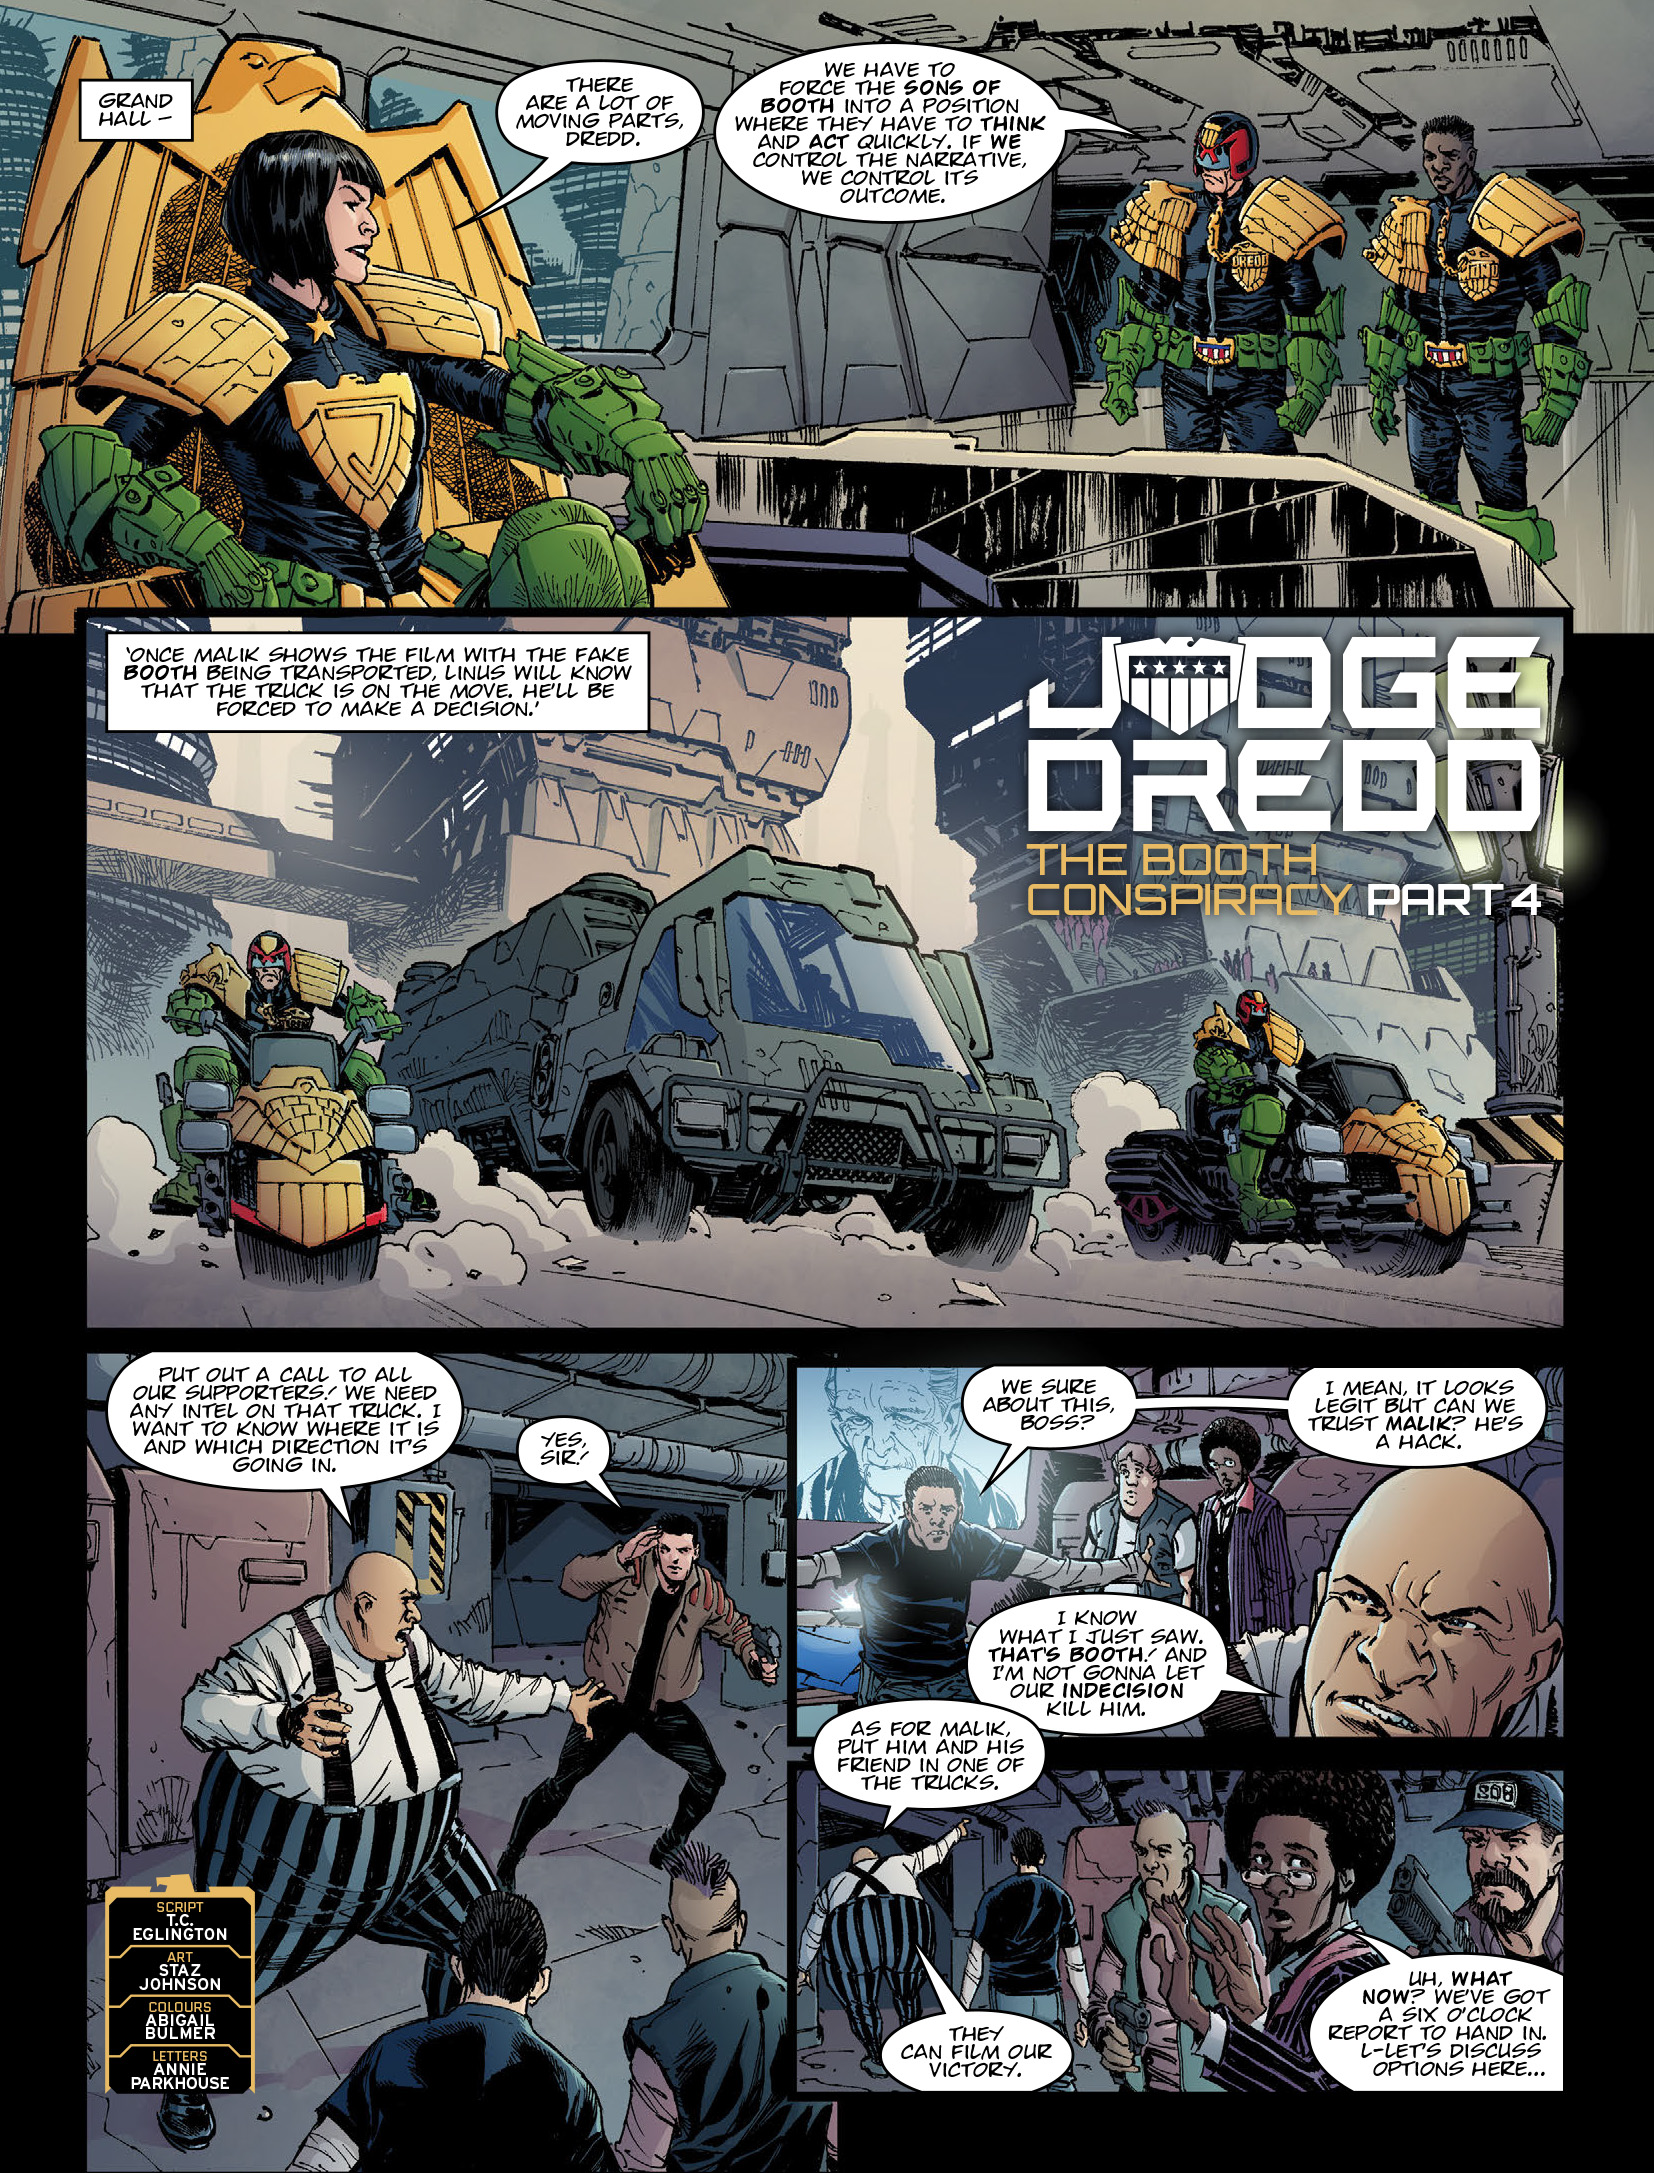 2000 AD: Chapter 2098 - Page 3